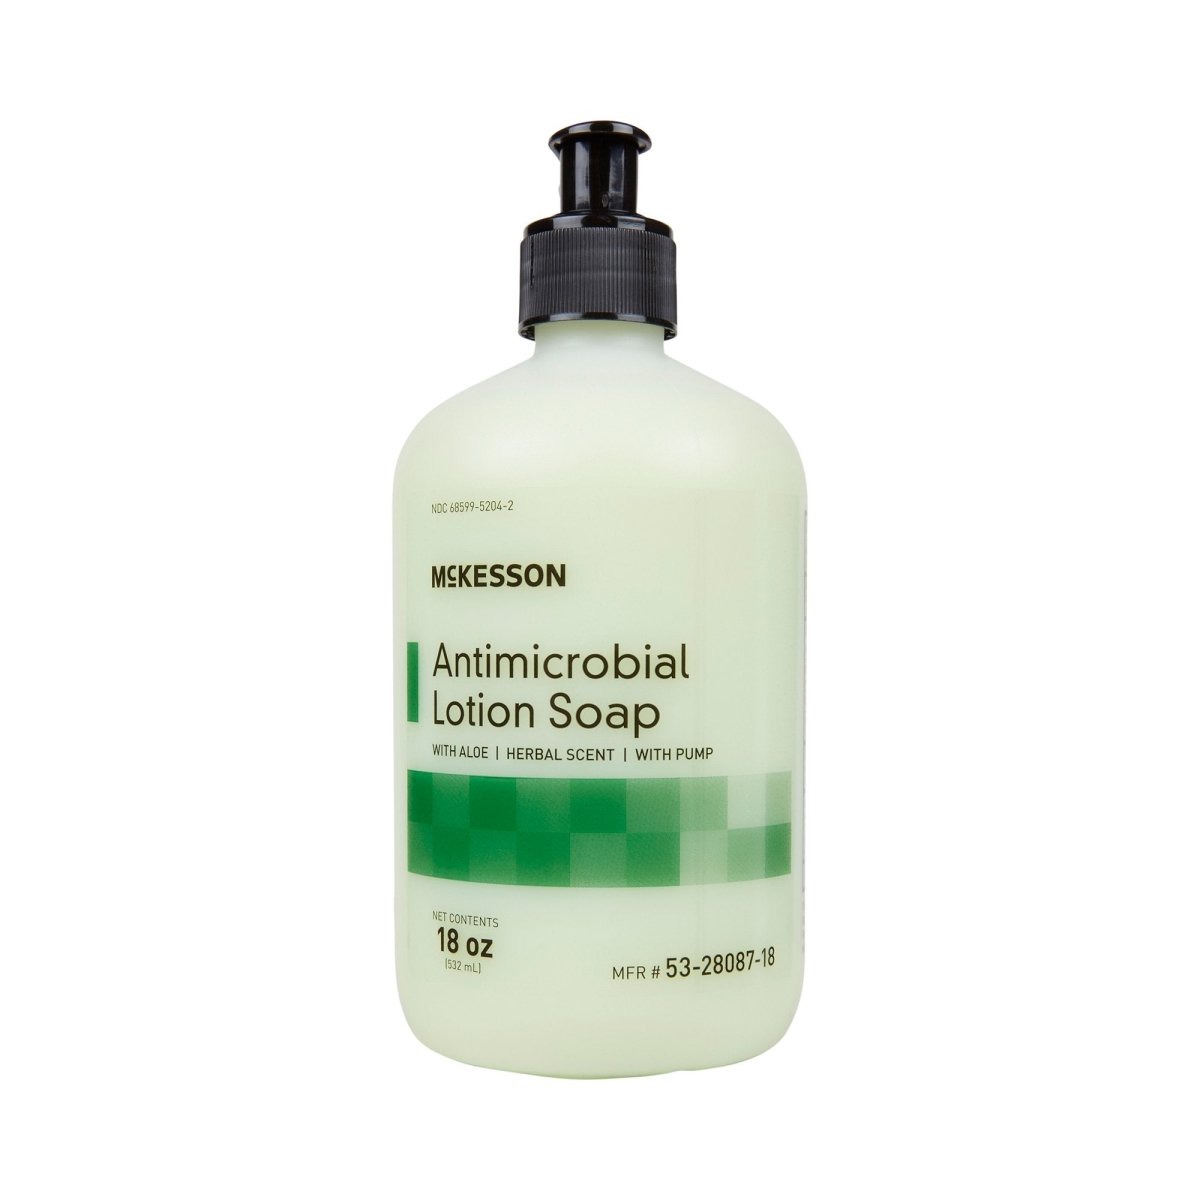 McKesson Antimicrobial Lotion Soap, Herbal Scent, 0.95% Strength - 937908_EA - 3